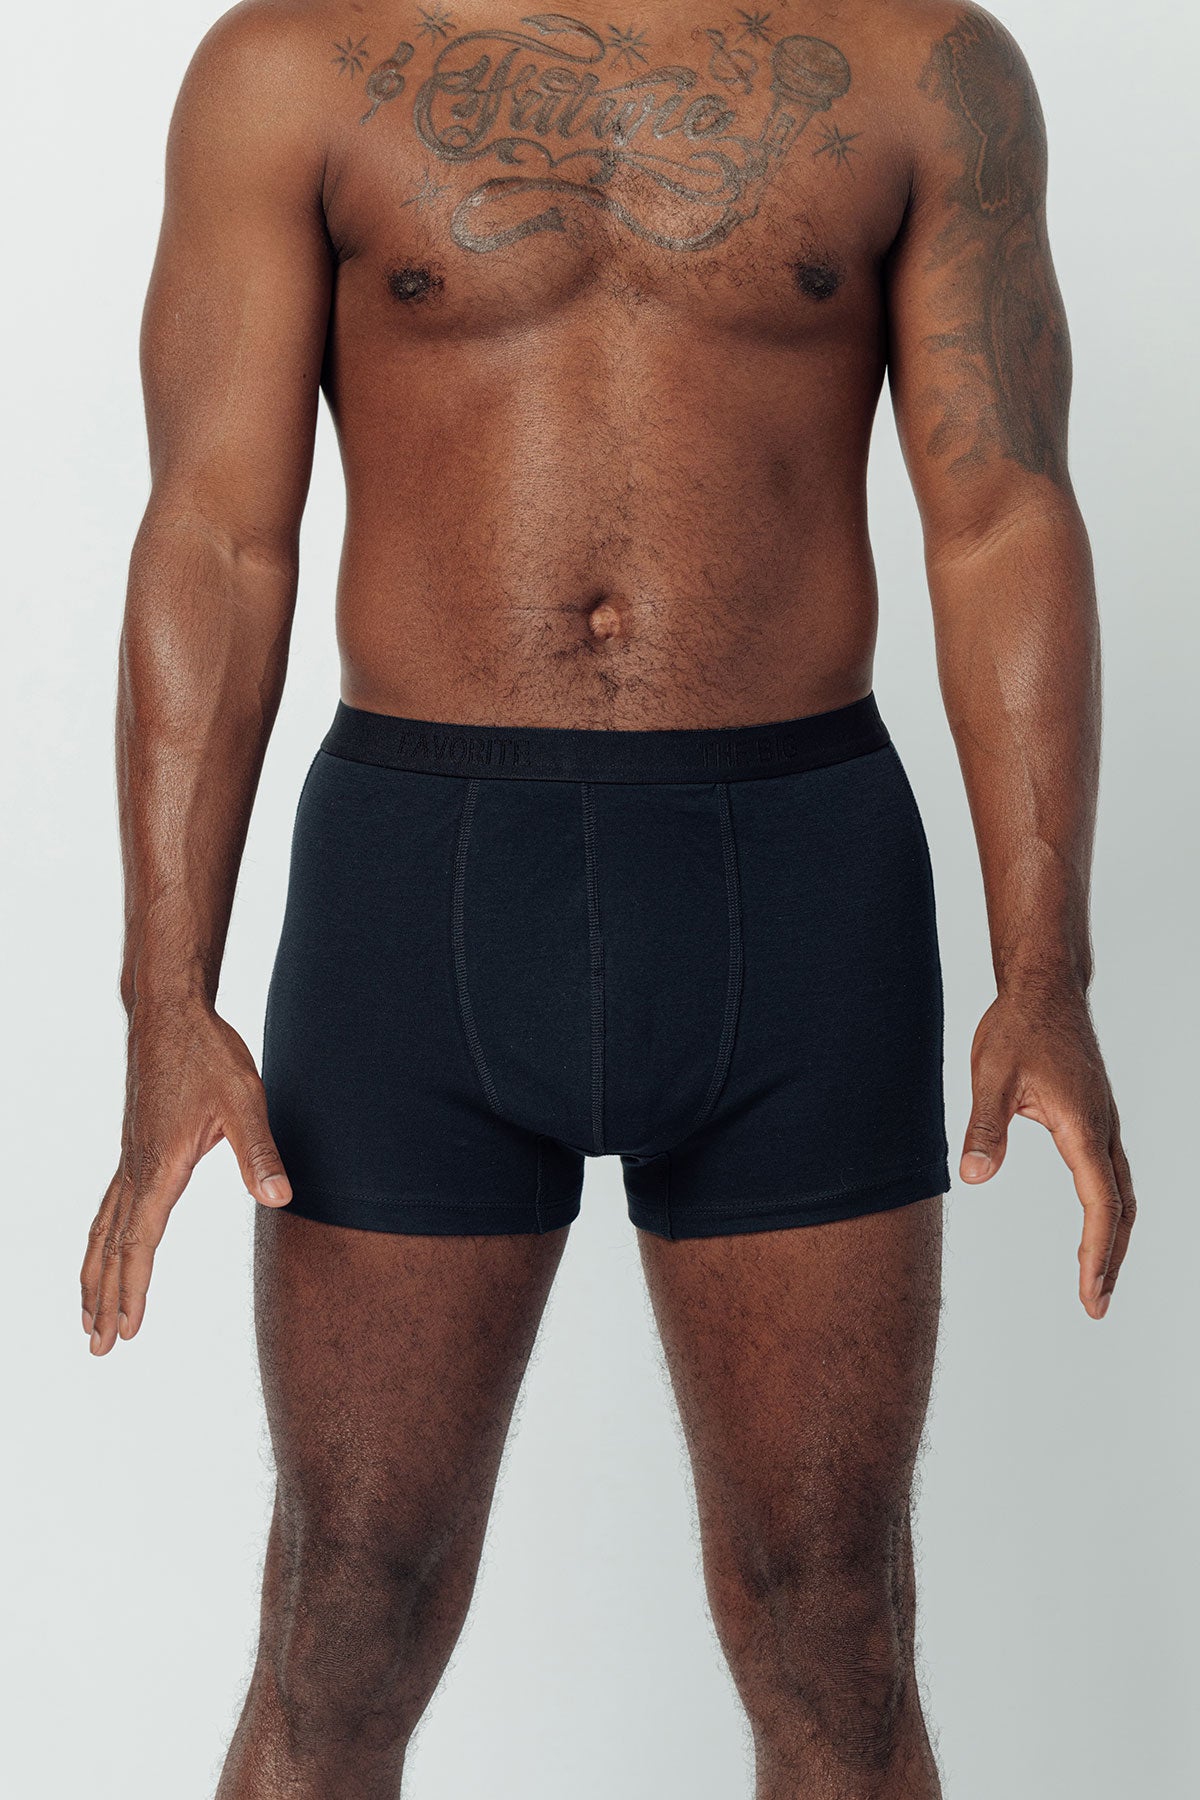 Your boo in Midnight Blue? It doesn't get hotter. Discover new Mens  Underwear colors, styles, and returning favorites on Monday, Februa